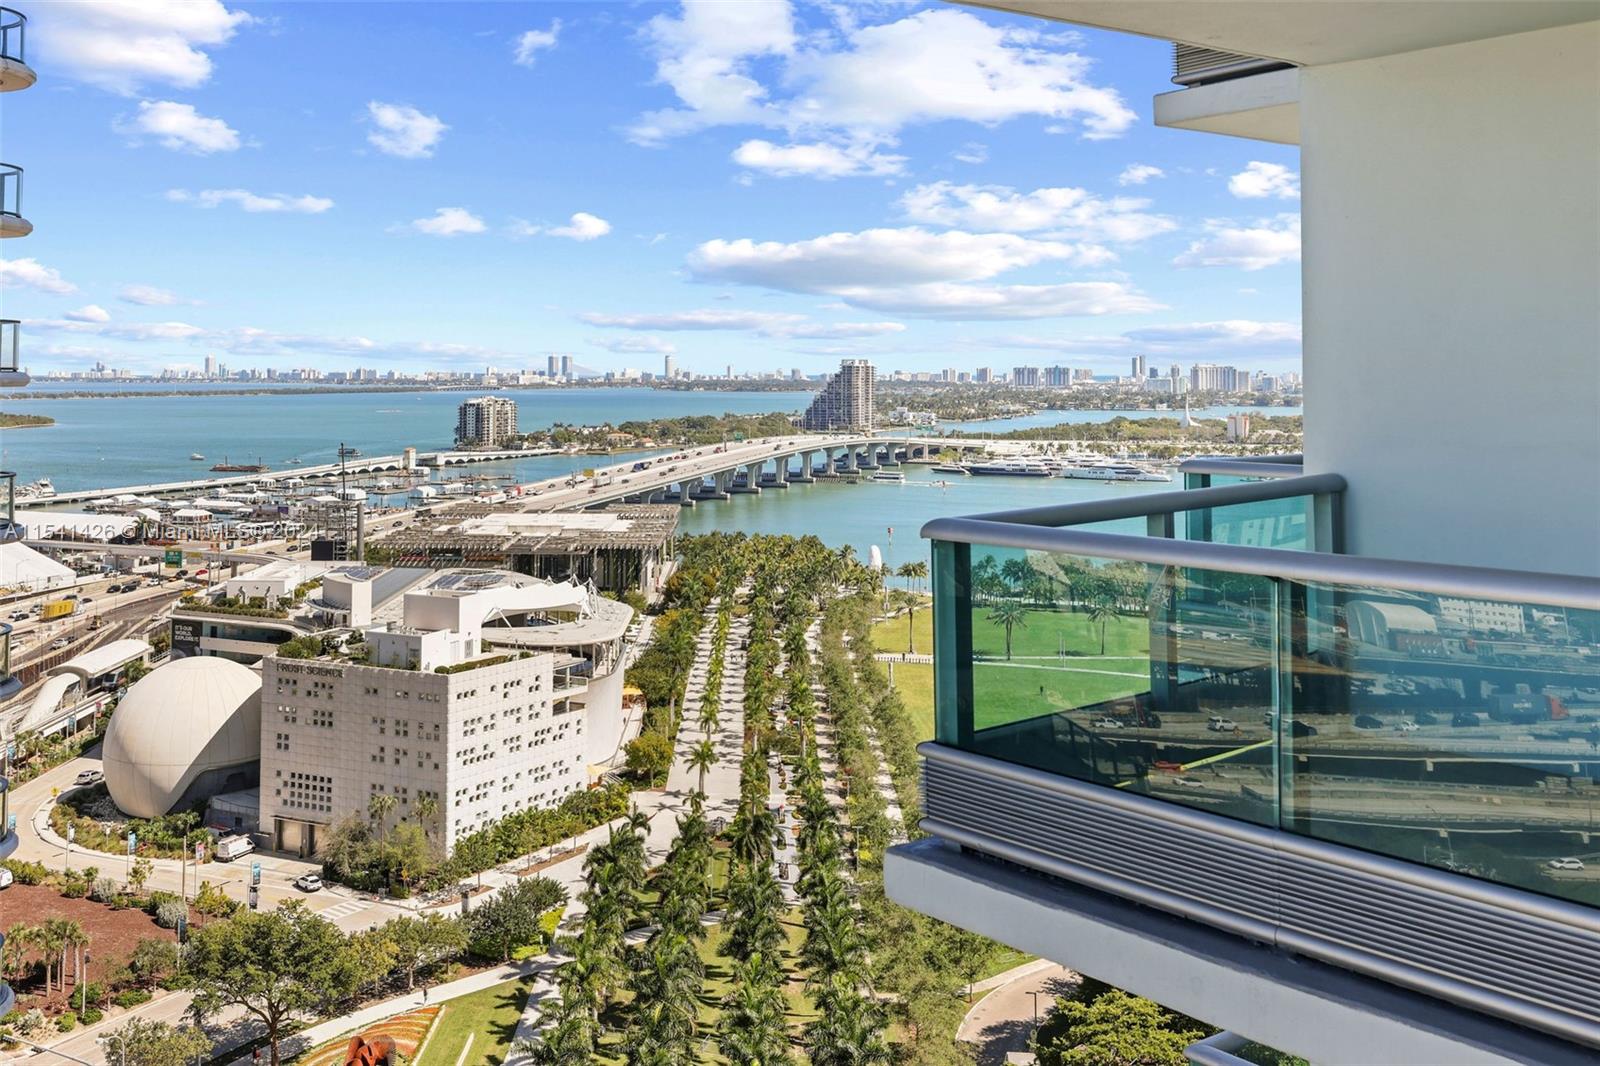 FULLY FURNISHED SPACIOUS 1 BEDROOM WITH DEN WITH GORGEOUS BAY AND CITY VIEWS. 2 LARGE BALCONIES 1 ASSIGNED PARKING SPACE. SPECTACULAR LOCATION WALK TO PAMM, FROST MUESEUM, MAURICE FERRE PARK, HEAT GAMES, TOP RESTAURANTS, WORLDCENTER MIAMI, ARSHT CENTER AND MORE. EXCLUSIVE 900 BISCAYNE OFFERS LUXURIOUS AMENITIES INCLUDING 2 POOLS, FULL-SERVICE SPA, STATE OF THE ART FITNESS CENTER, THEATER, BILLIARD ROOM, BUSINESS CENTER, ETC. CALL OR TEXT LISTING AGENT FOR SHOWINGS. UNIT IS TENANT OCCUPIED THROUGH OCTOBER 2024 MUST COORDINATE SHOWINGS IN ADVANCE.